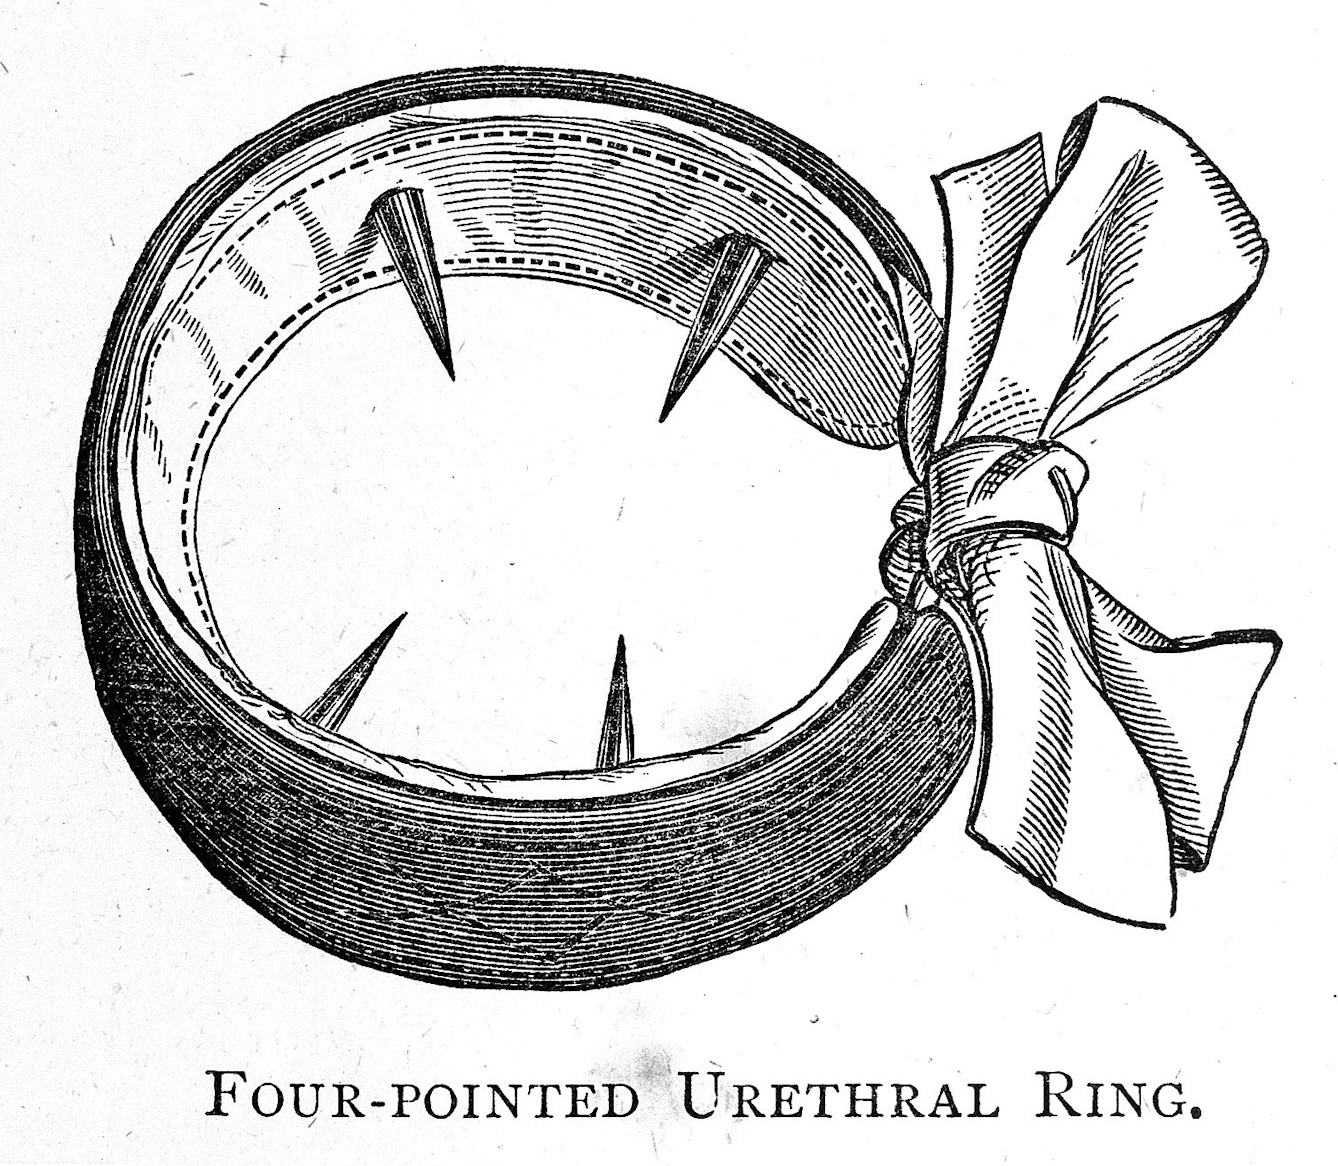 Four-pointed urethral ring for the treatment of masturbation